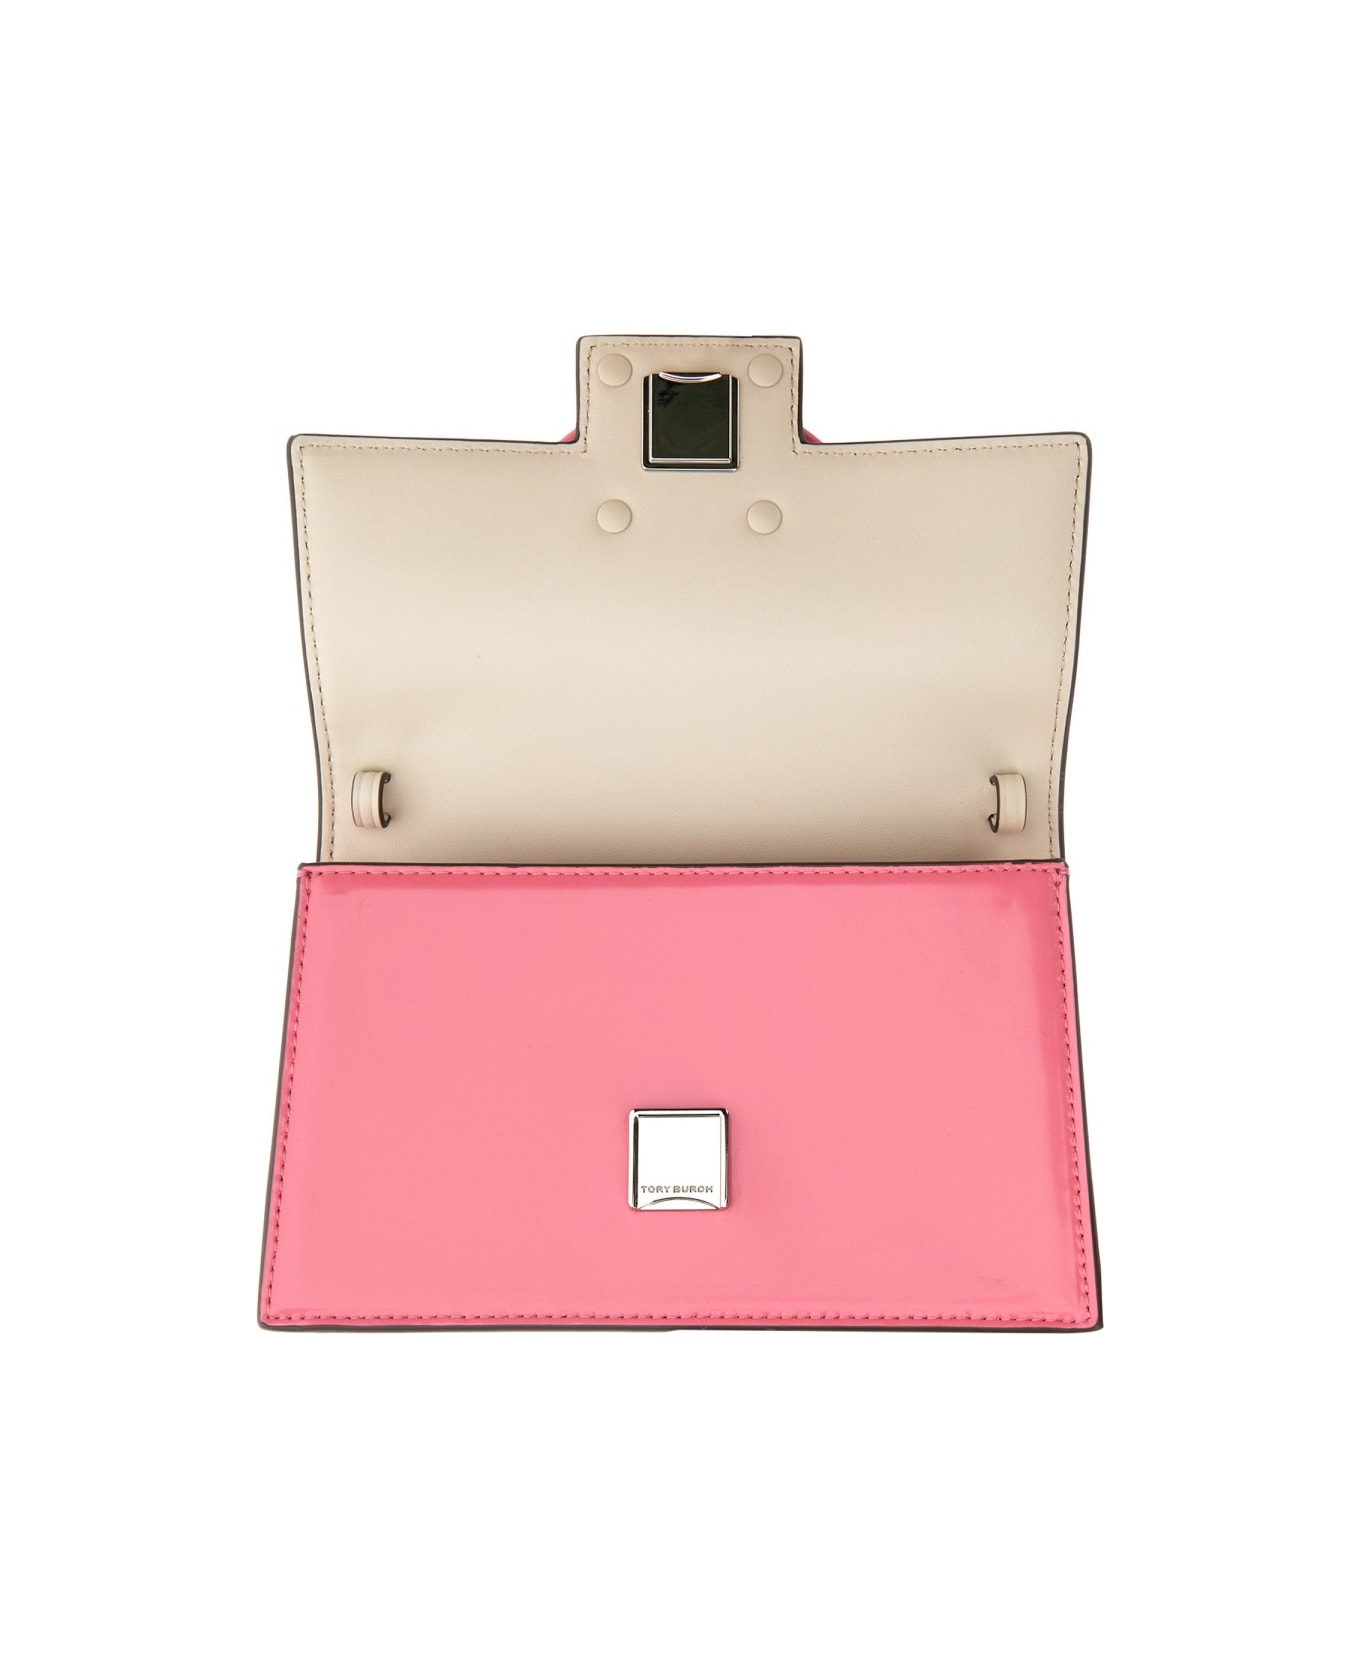 Tory Burch Mini Brushed Leather Bag - PINK